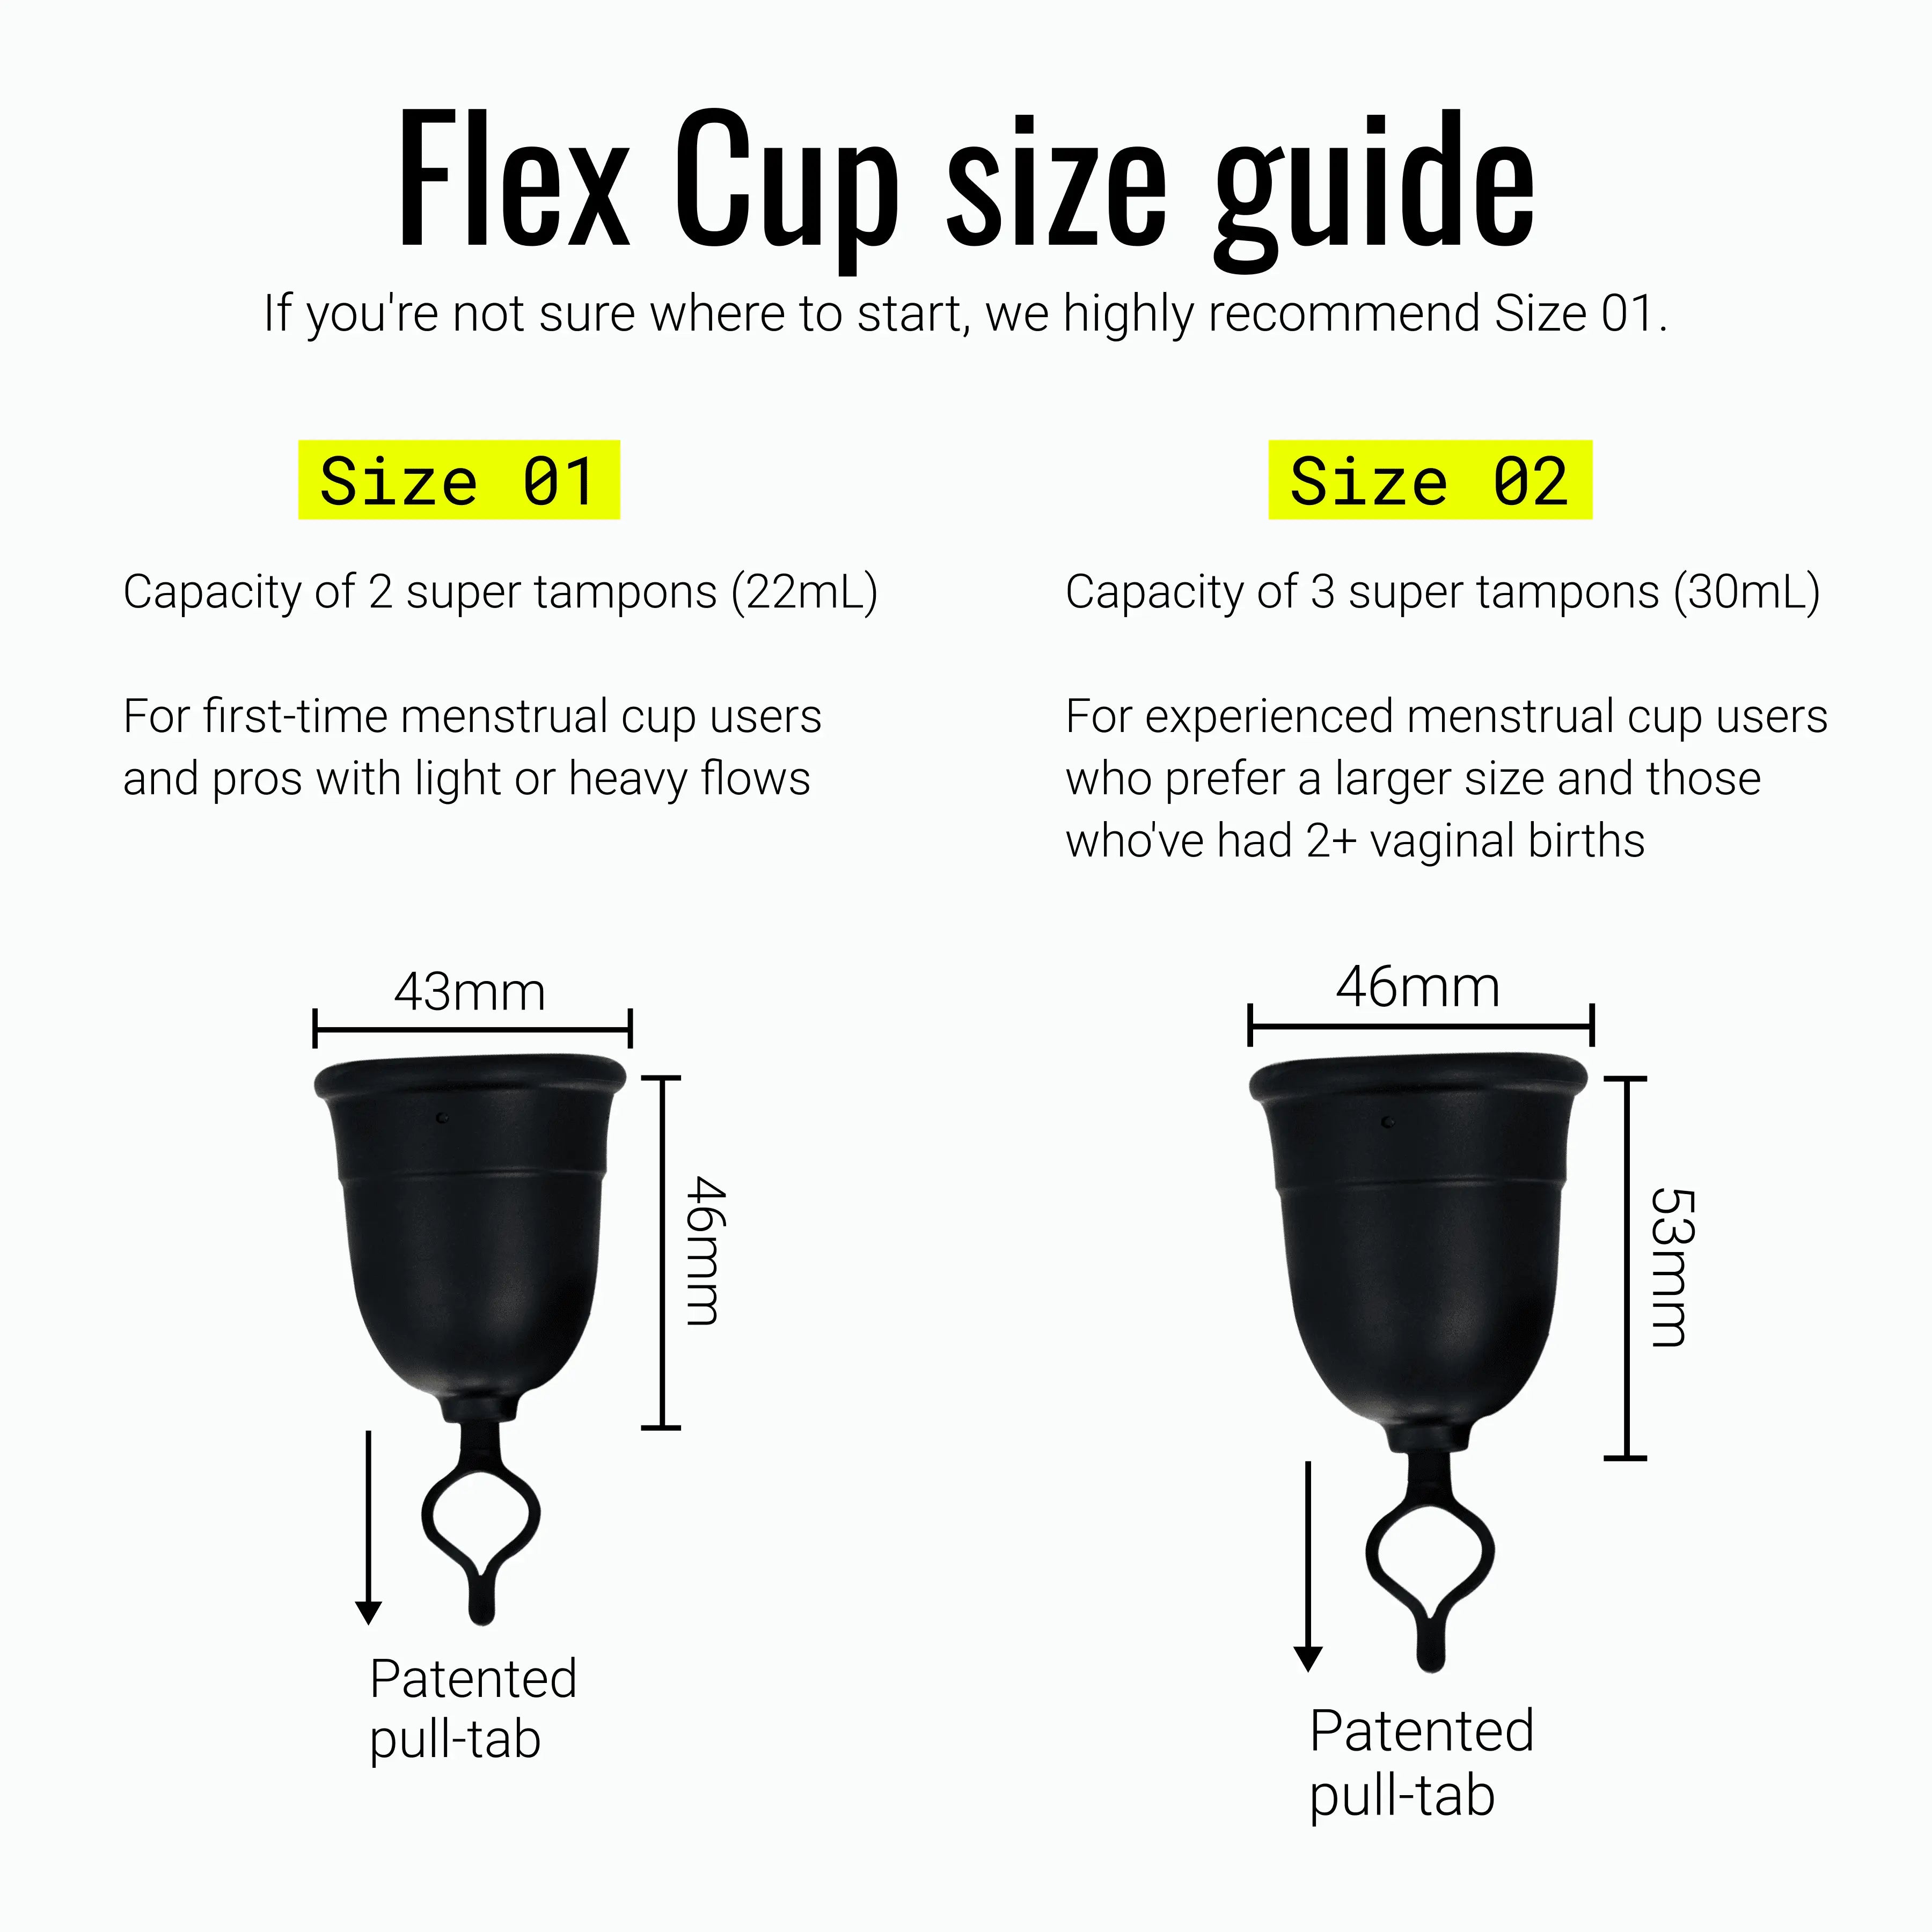 Flex Cup Starter Kit (Full Fit - Size 02), Reusable Menstrual Cup + 2 Free  Menstrual Discs, Pull-Tab for Easy Removal, Tampon + Pad Alternative